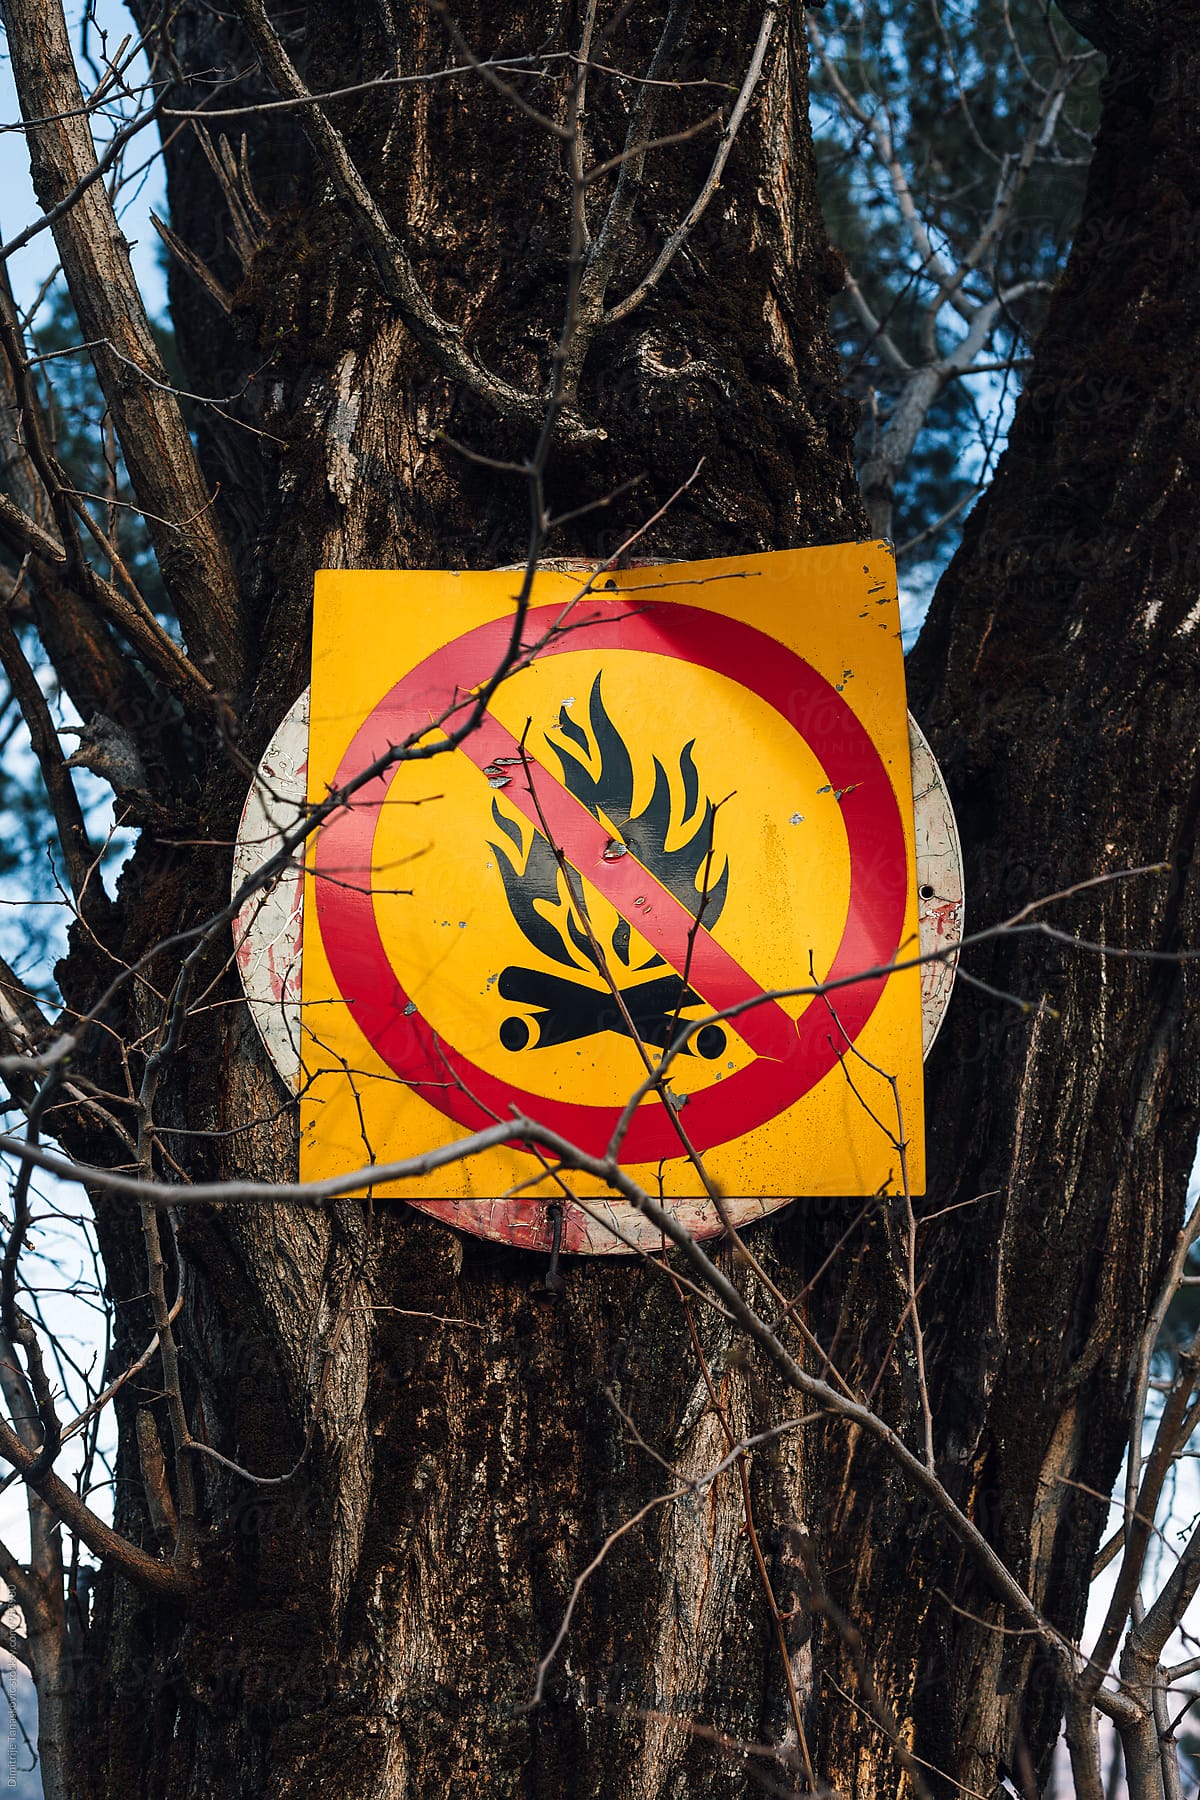 Fire prohibition sign